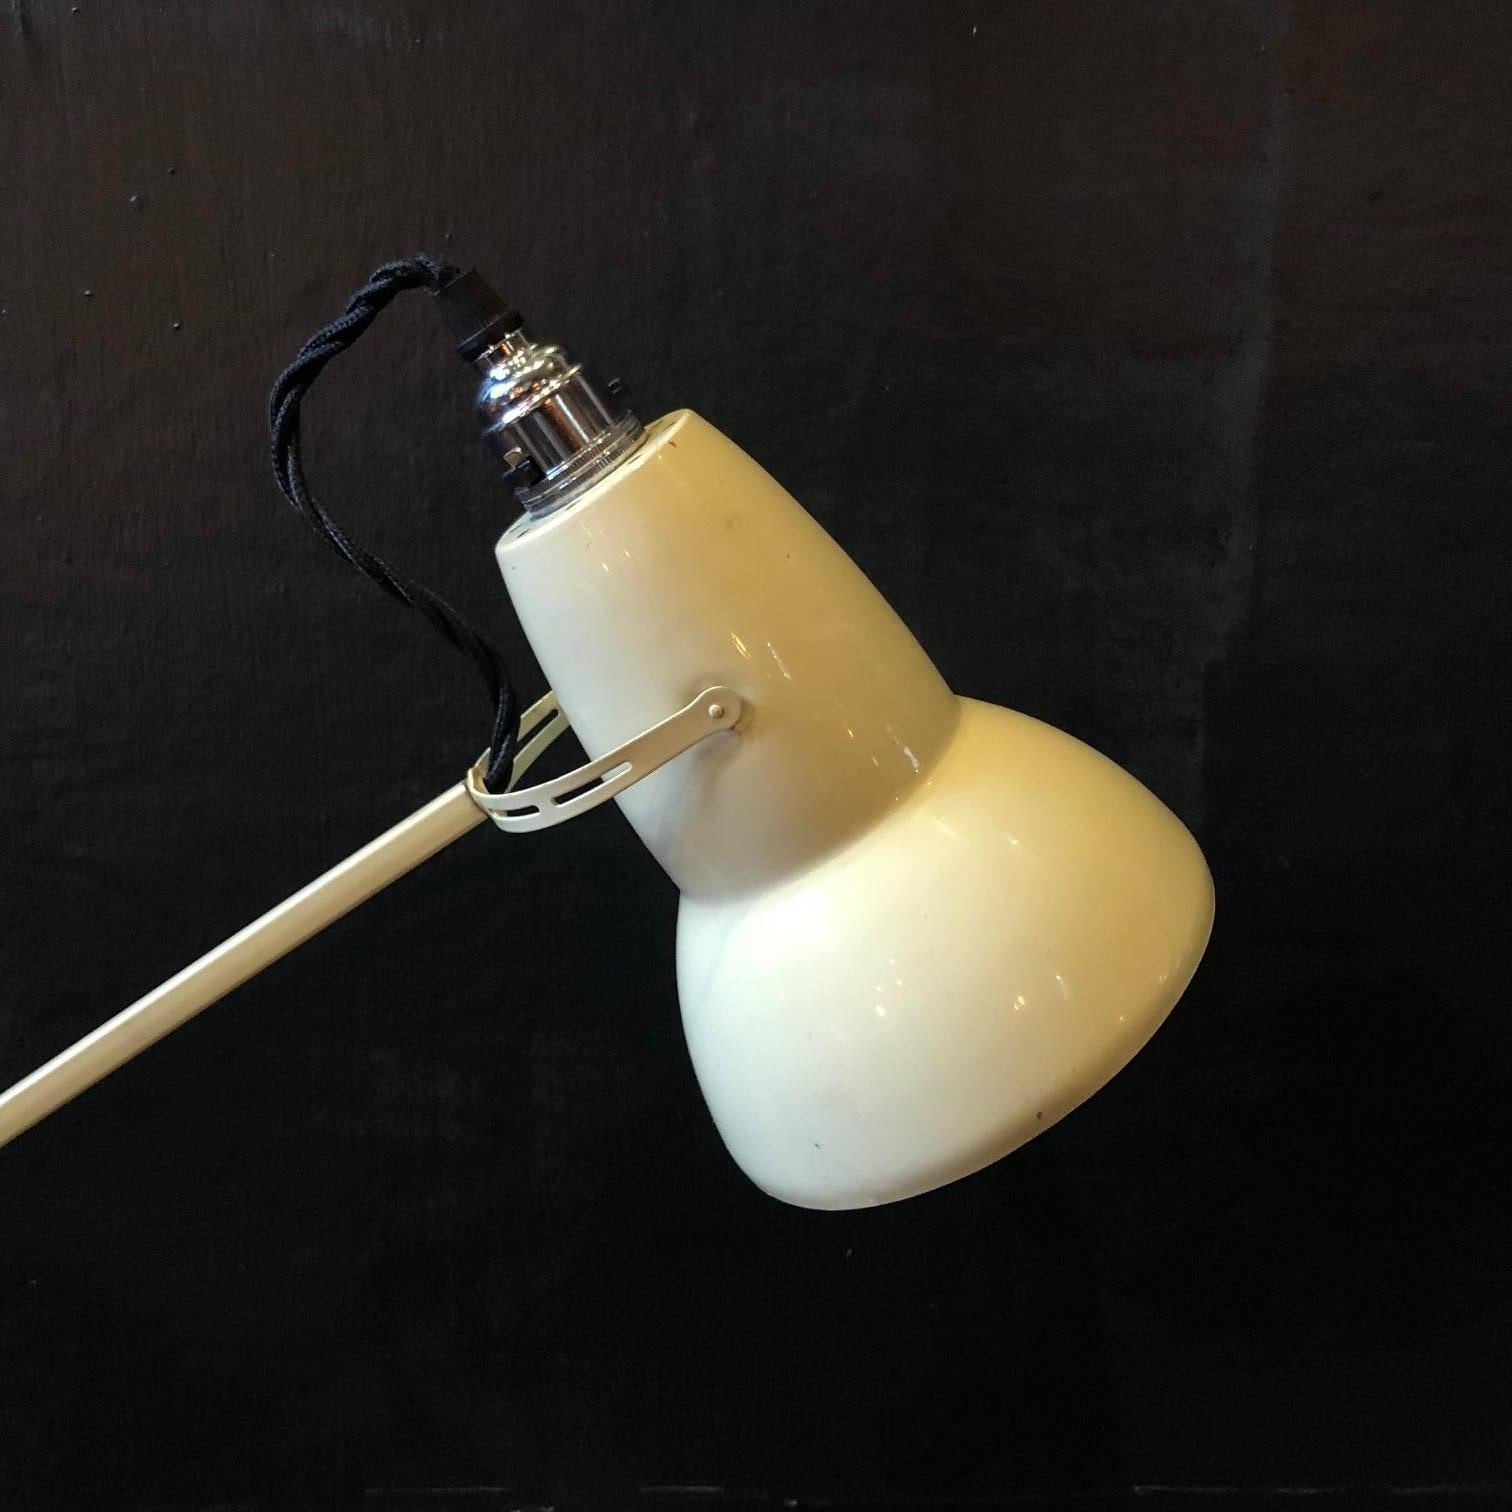 Designed by George Carwardine for Herbert Terry & Sons and made in Redditch, England, this is a lovely example of an original 1930s designed Anglepoise lamp.

This is the later (1960s) model with tulip shade, two-stepped base and adjustable